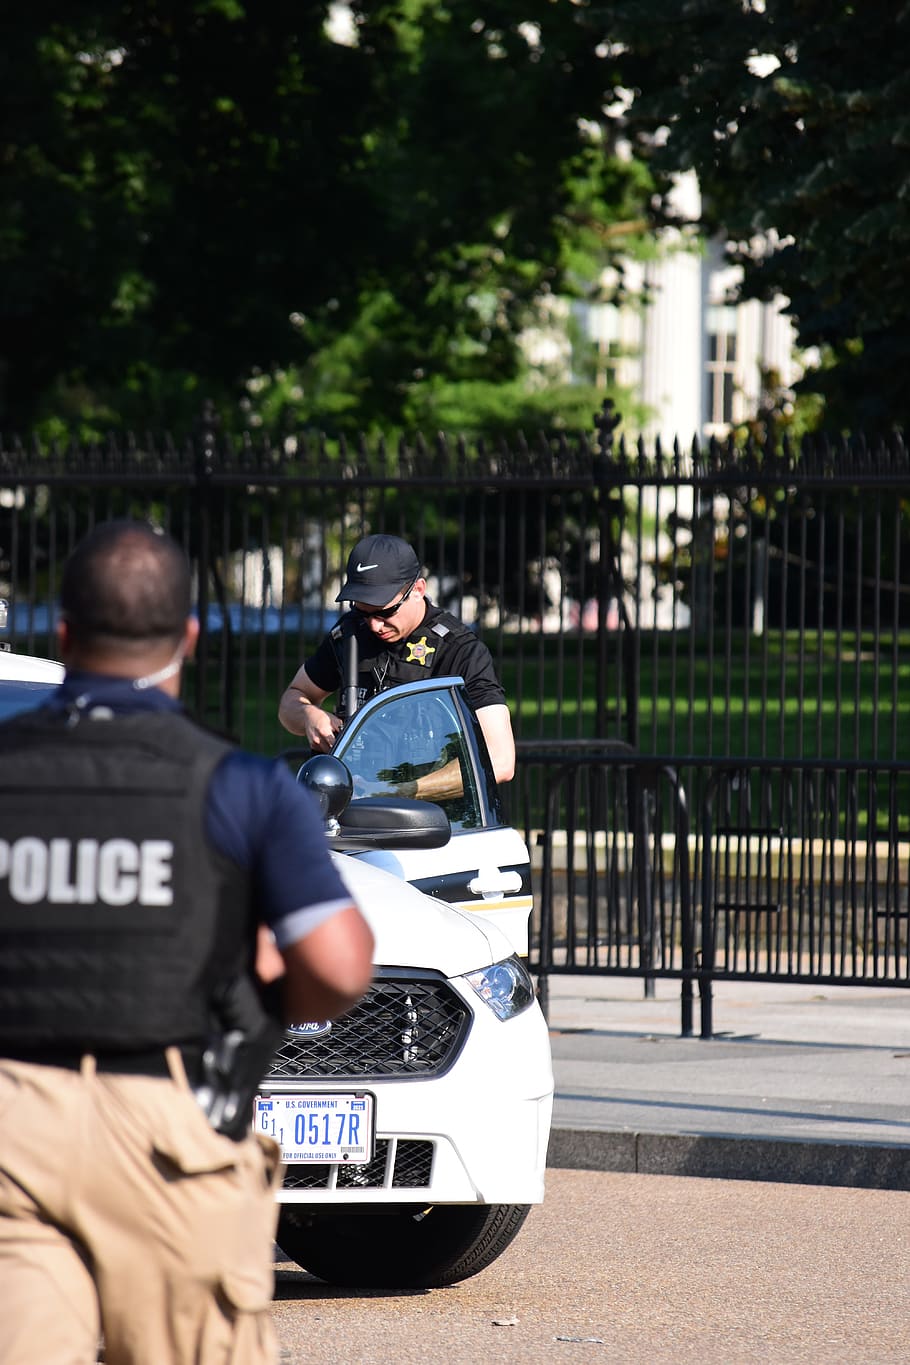 dc, usa, police, washington, government, federal, transportation, mode of transportation, security, protection